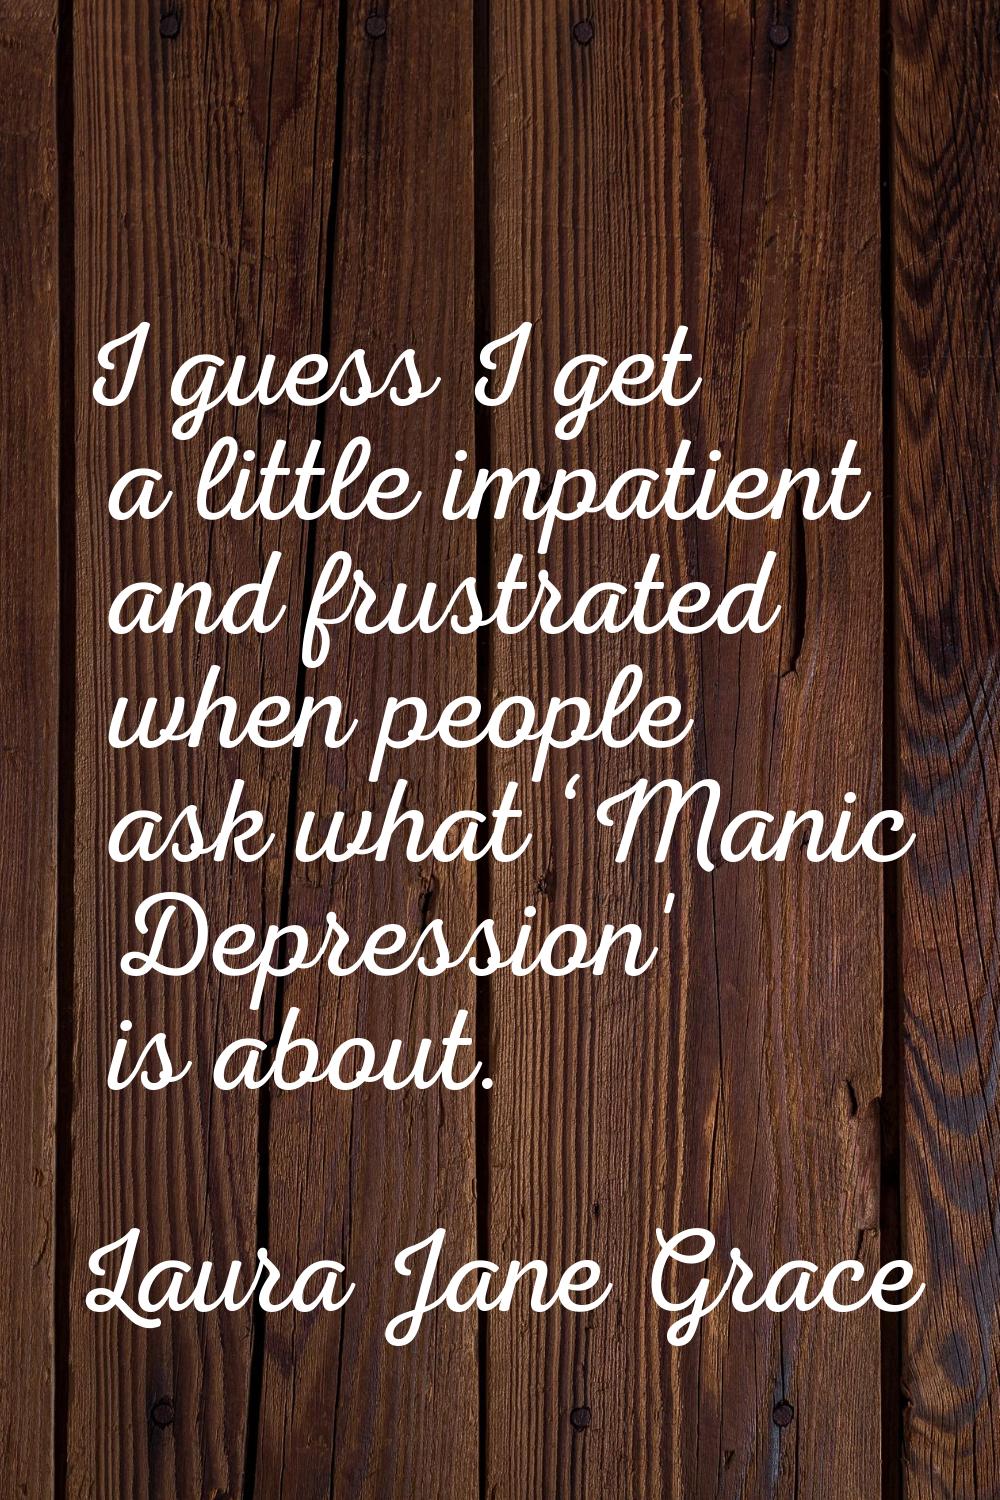 I guess I get a little impatient and frustrated when people ask what ‘Manic Depression' is about.